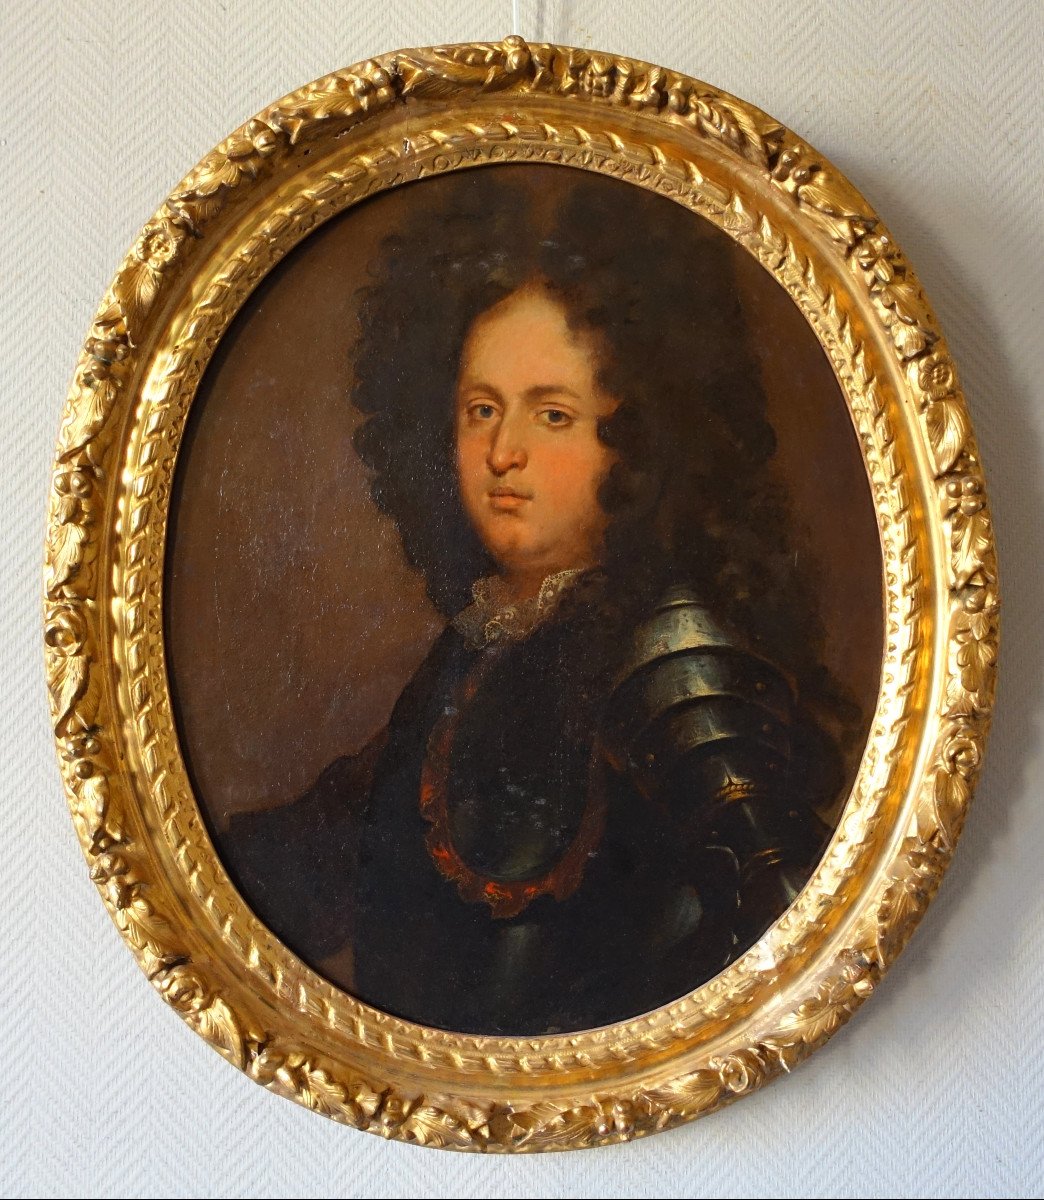 French School From The 17th Century, Portrait Of An Aristocrat Officer In Louis XIV Period Armor